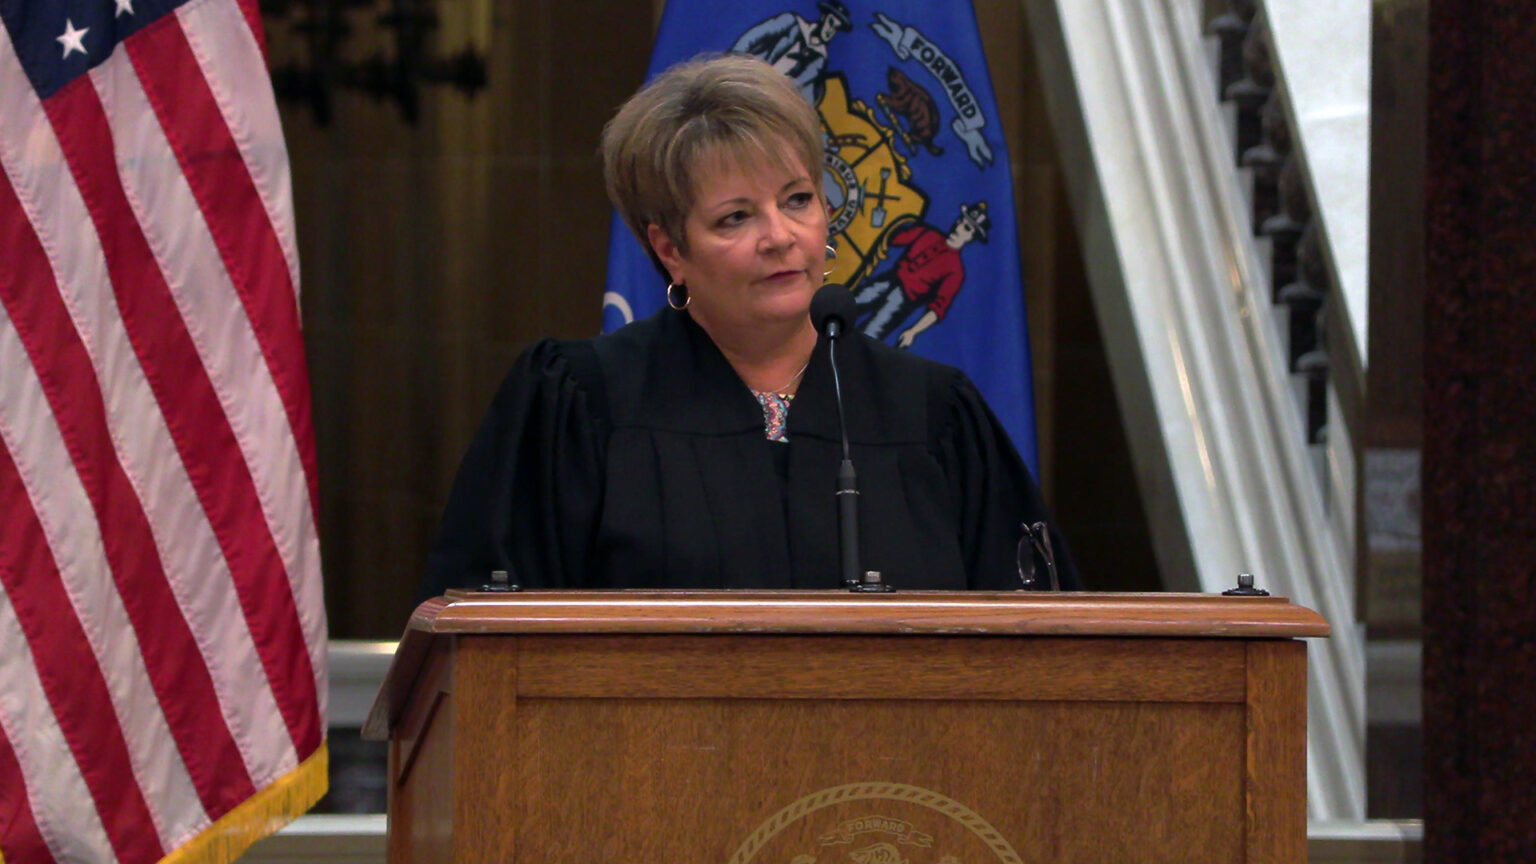 Janet Protasiewicz stands and speaks into a microphone mounted on a wood podium, with the U.S. and Wisconsin flags, as well as a marble staircase balustrade in the background. 